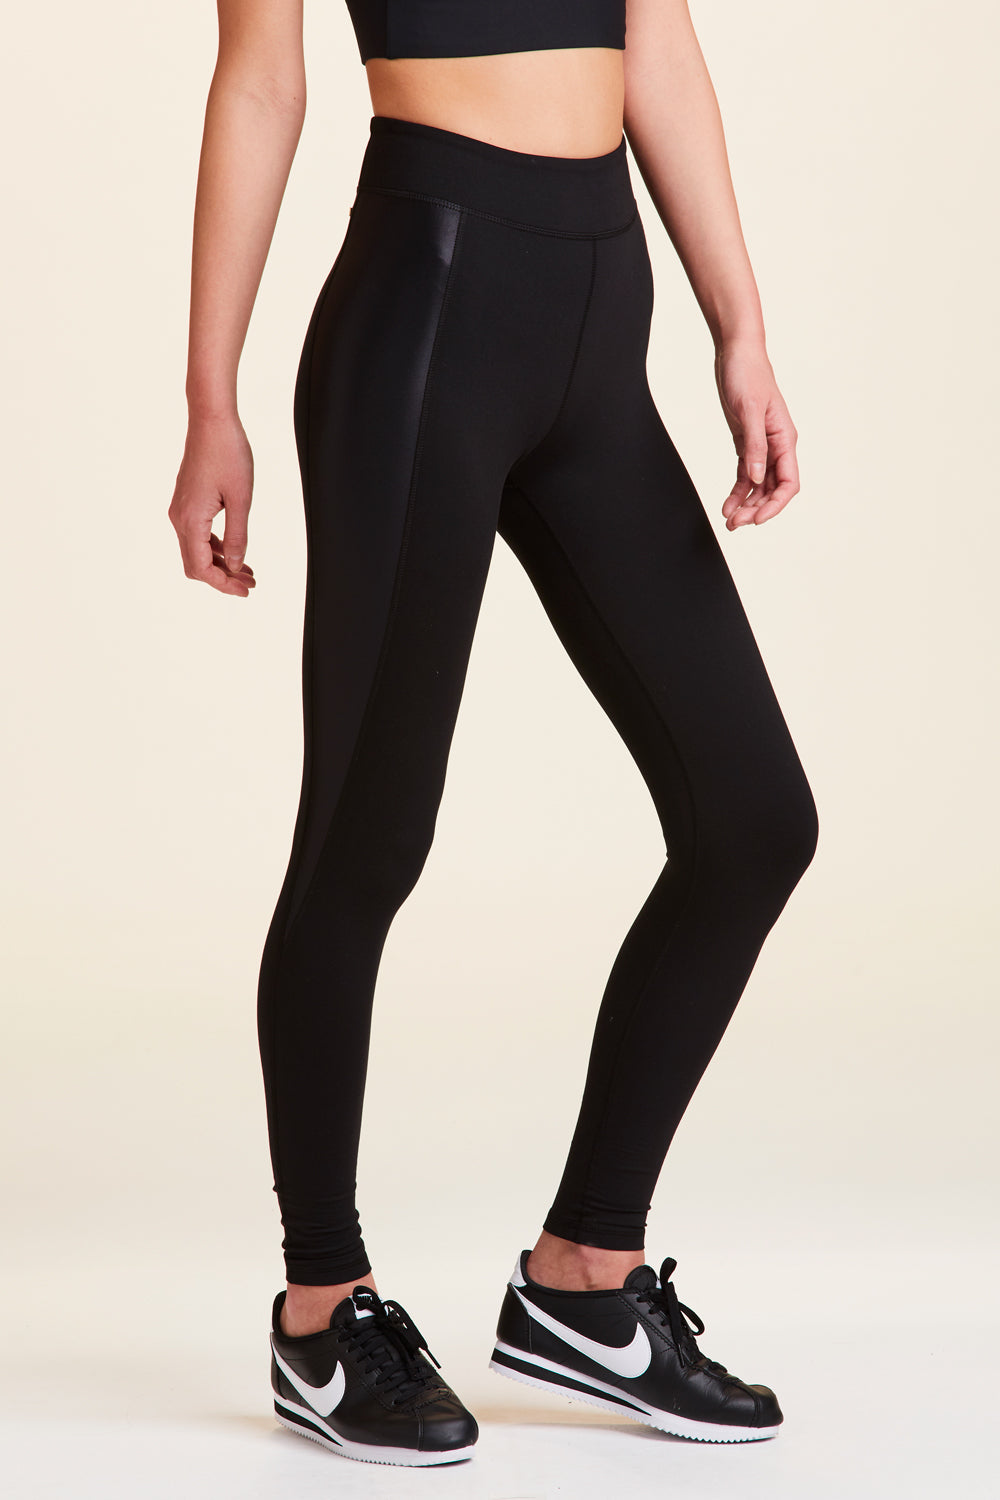 Black Alala All Day Tight for women